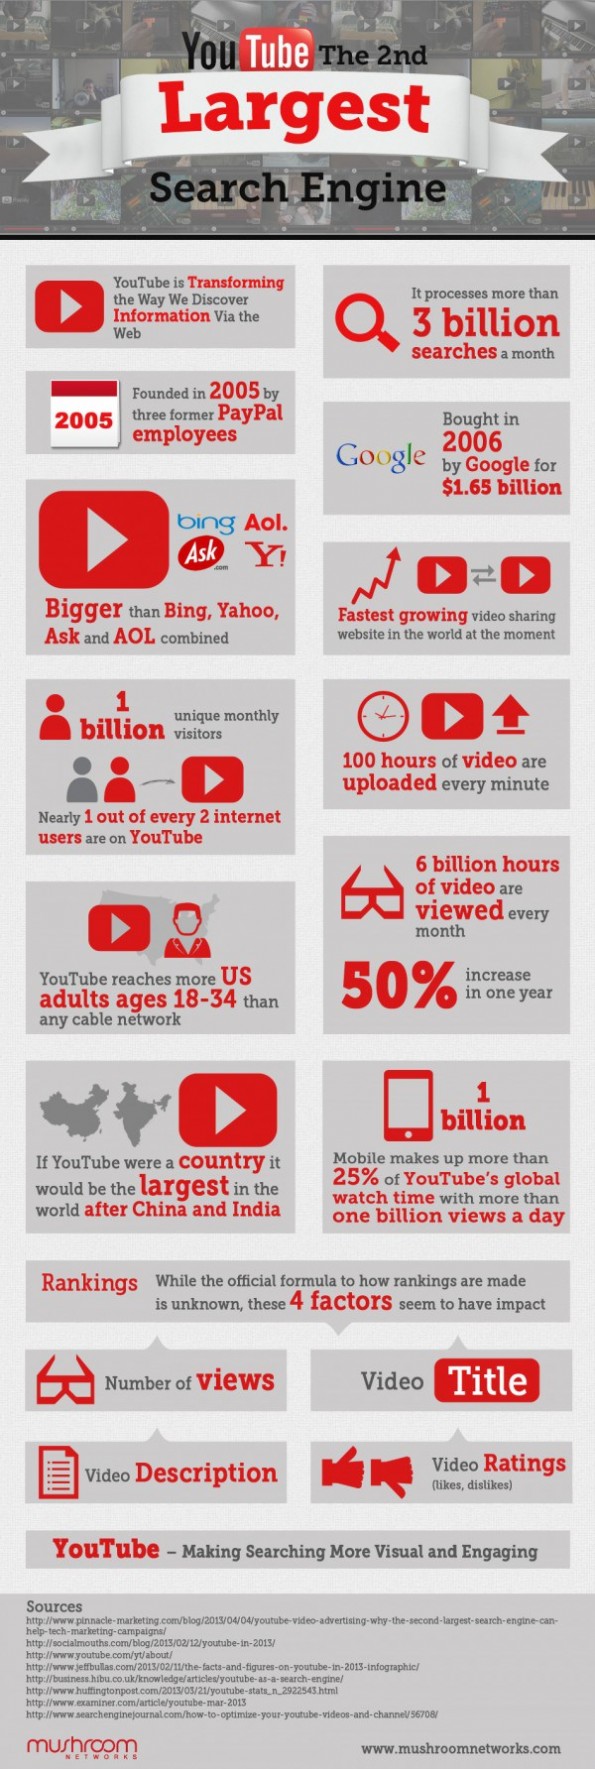 youtube-the-2nd-largest-search-engine-infographic-e1439847685718